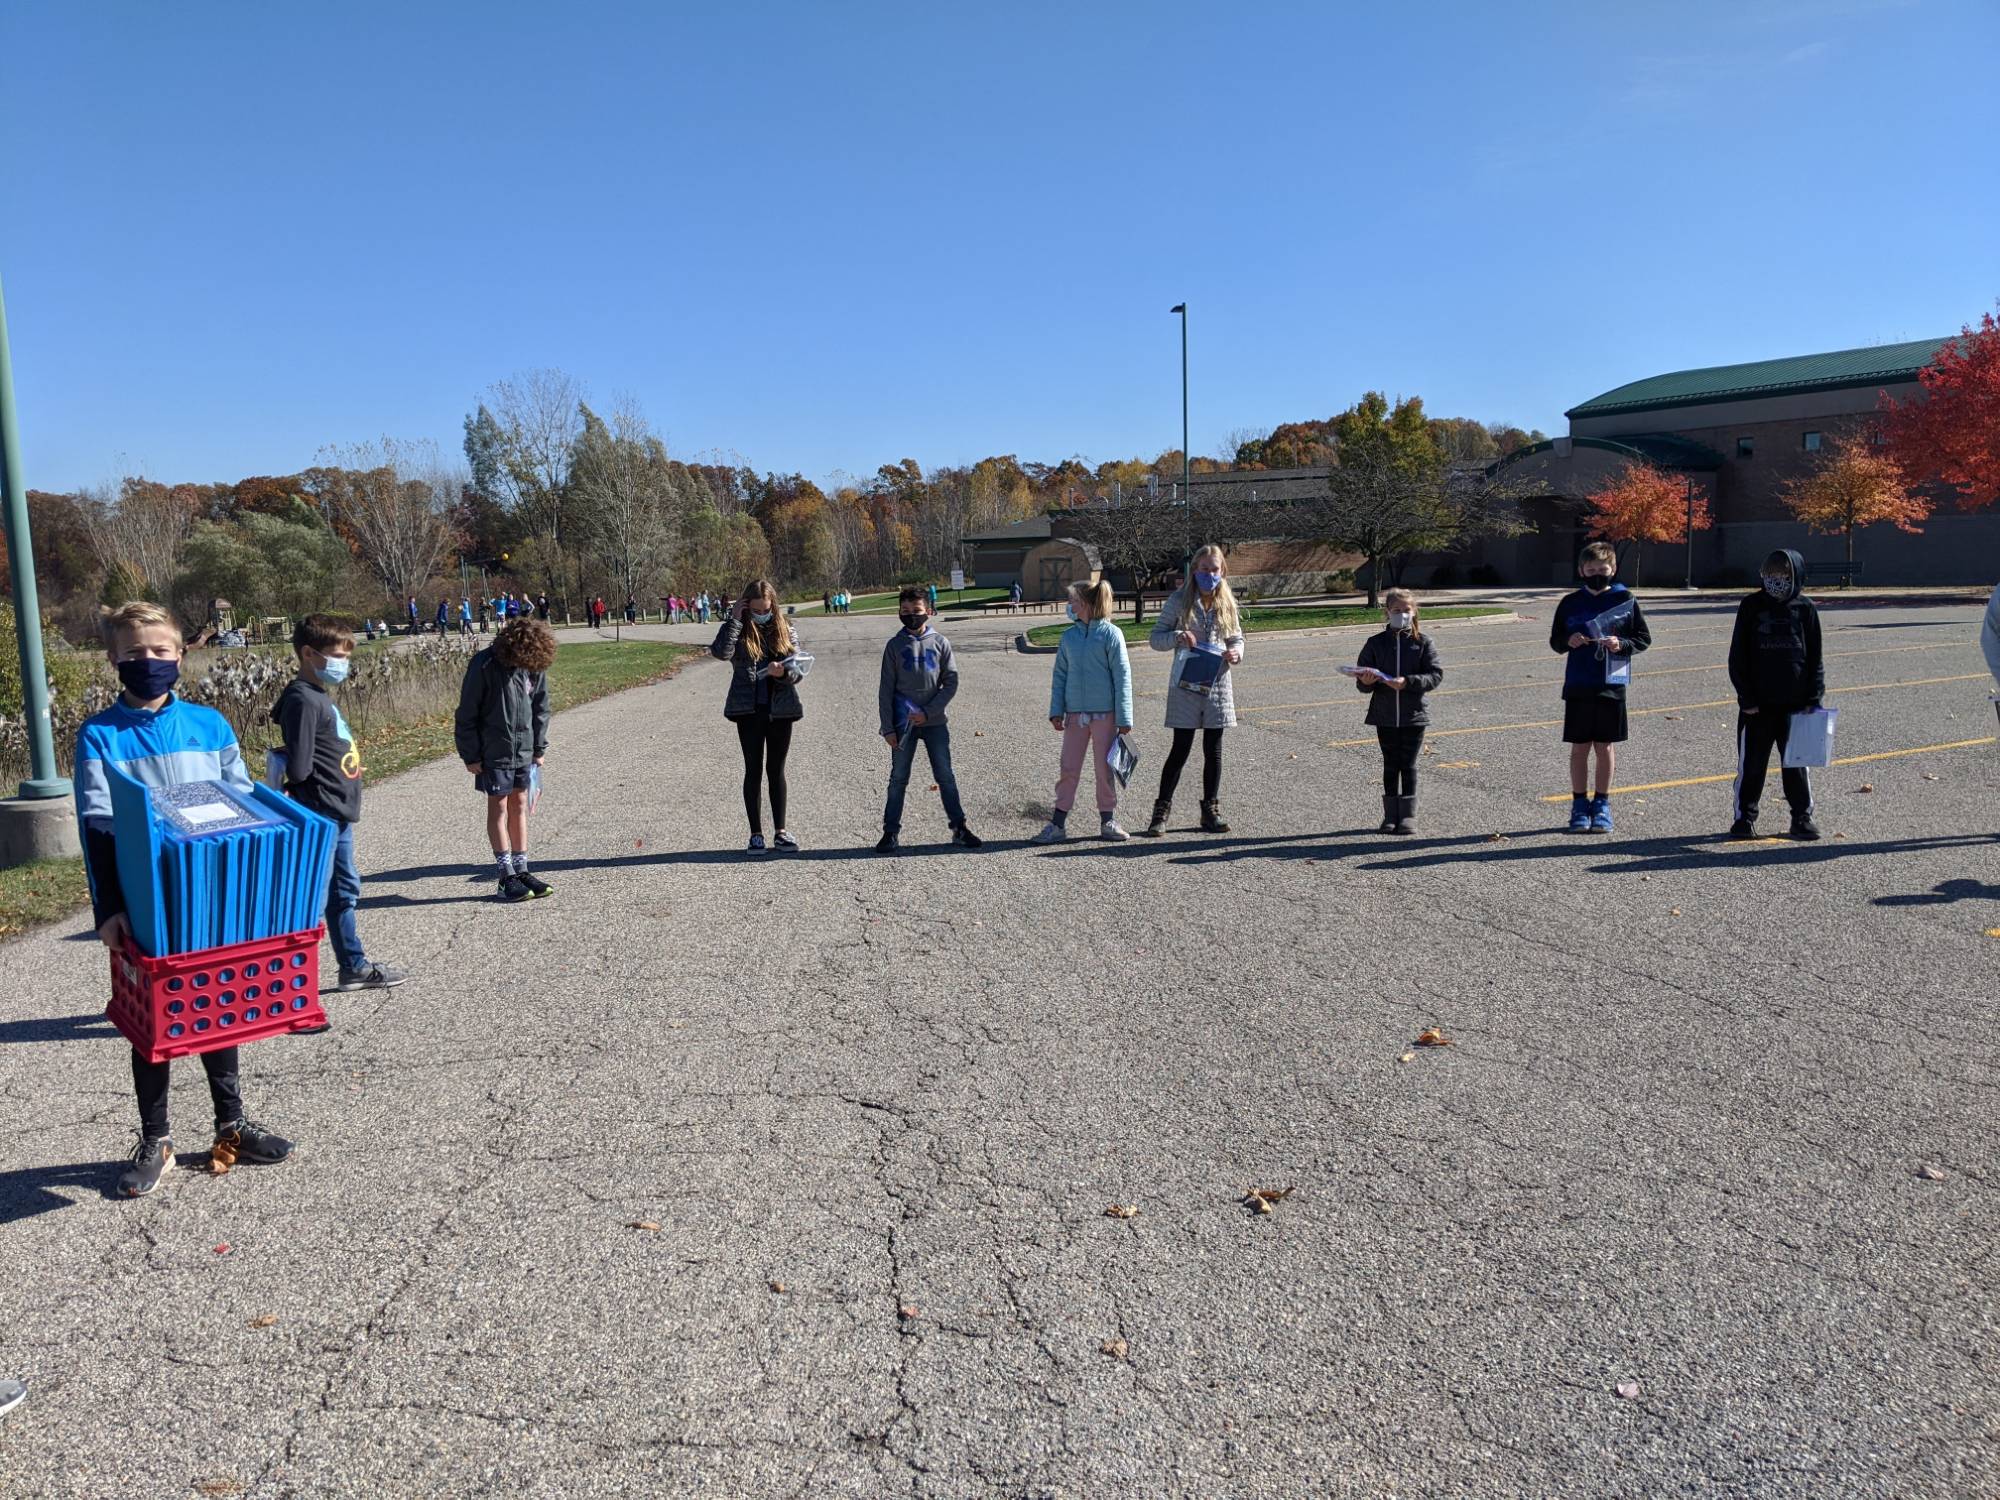 Students standing in semi-circle in parking lot